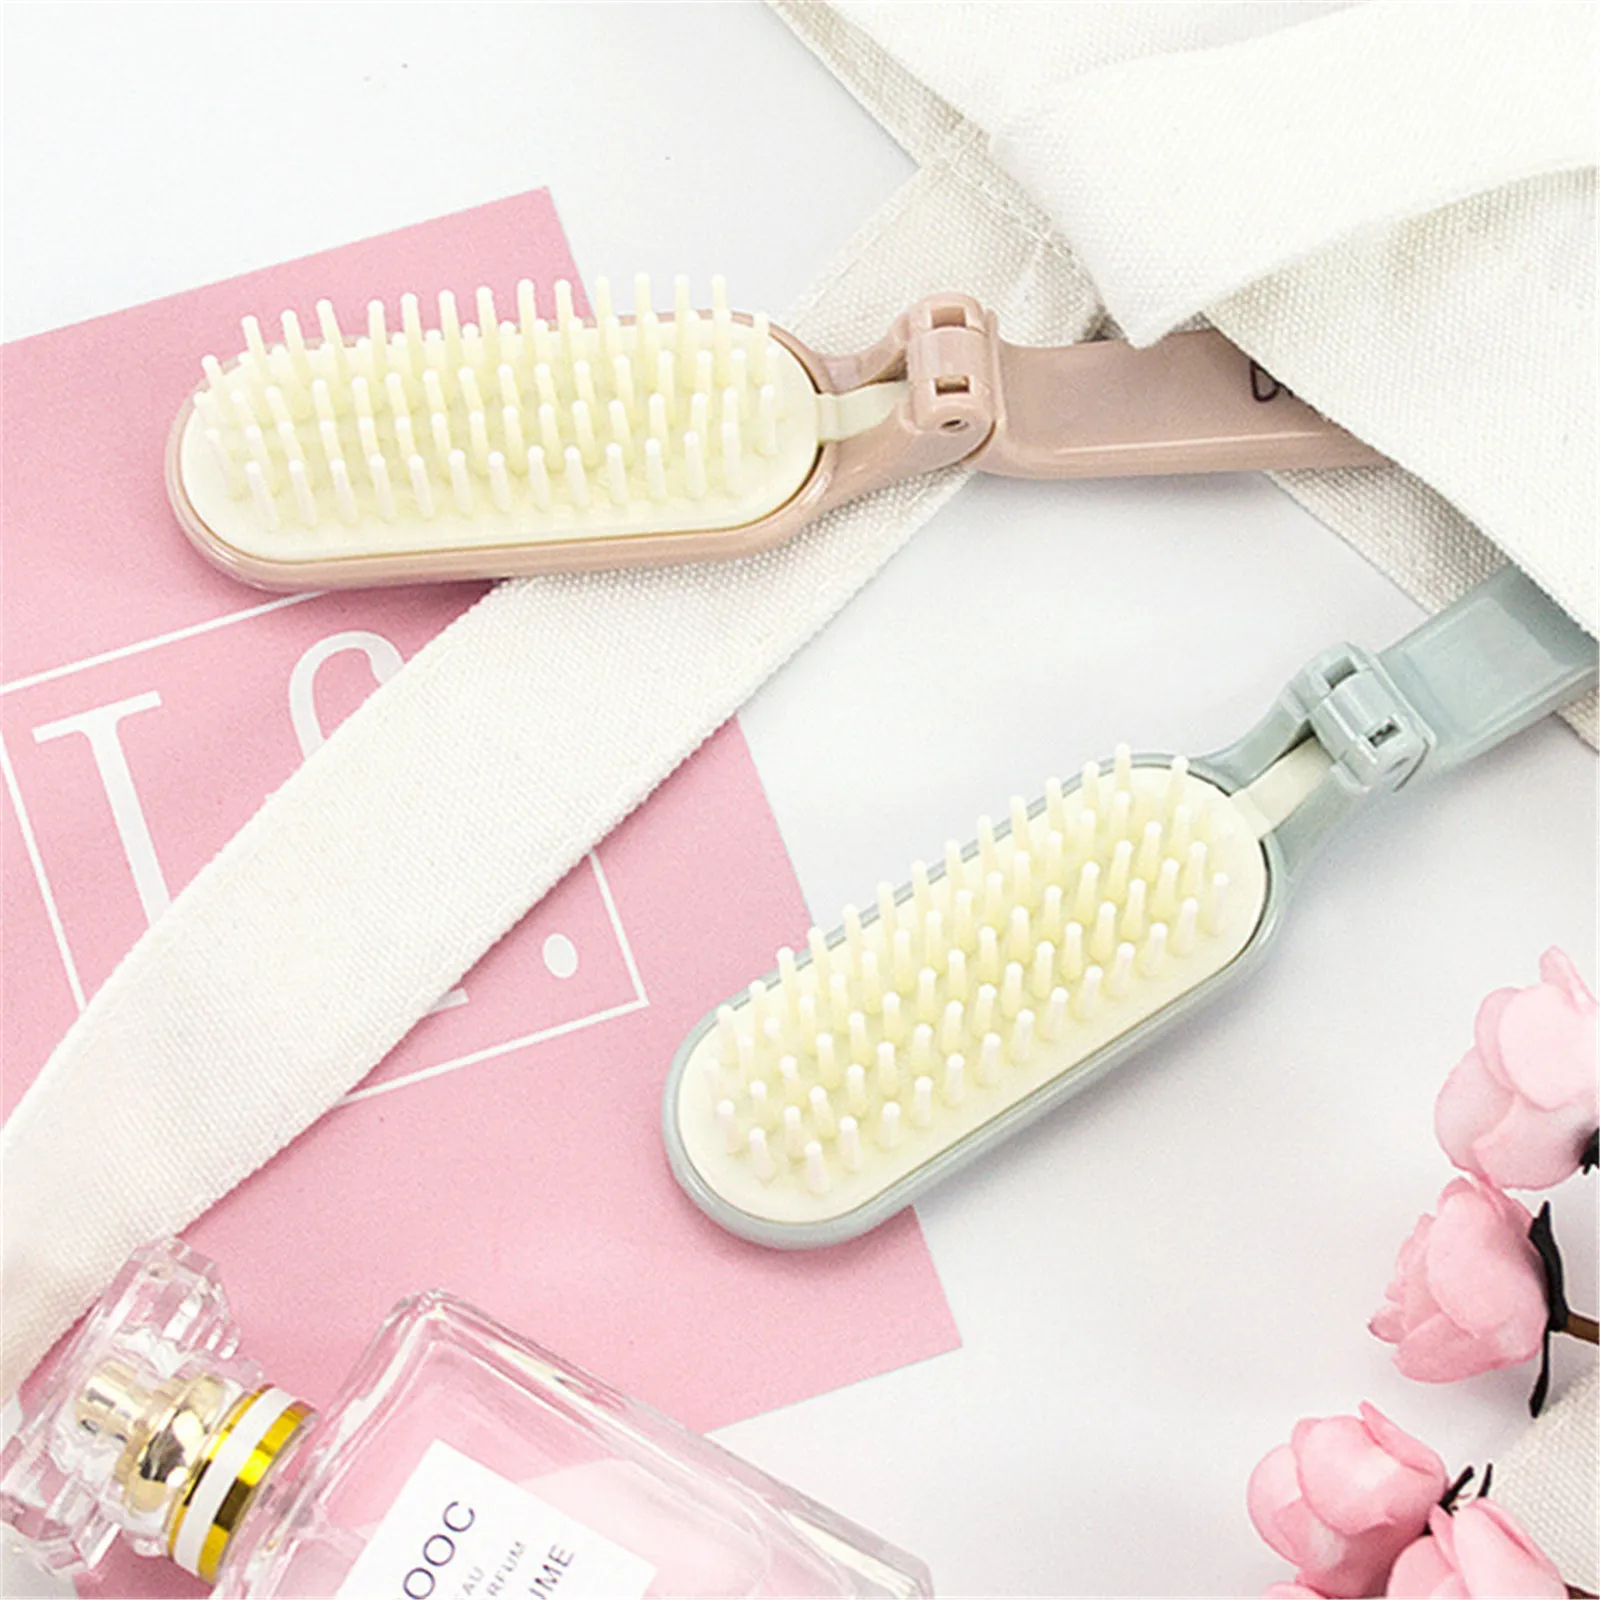 1Pc Foldable Hair Comb Portable Detangling Hair Brush Hair Brush Anti Static Head Massager Travel Combs Hair Styling Accessories